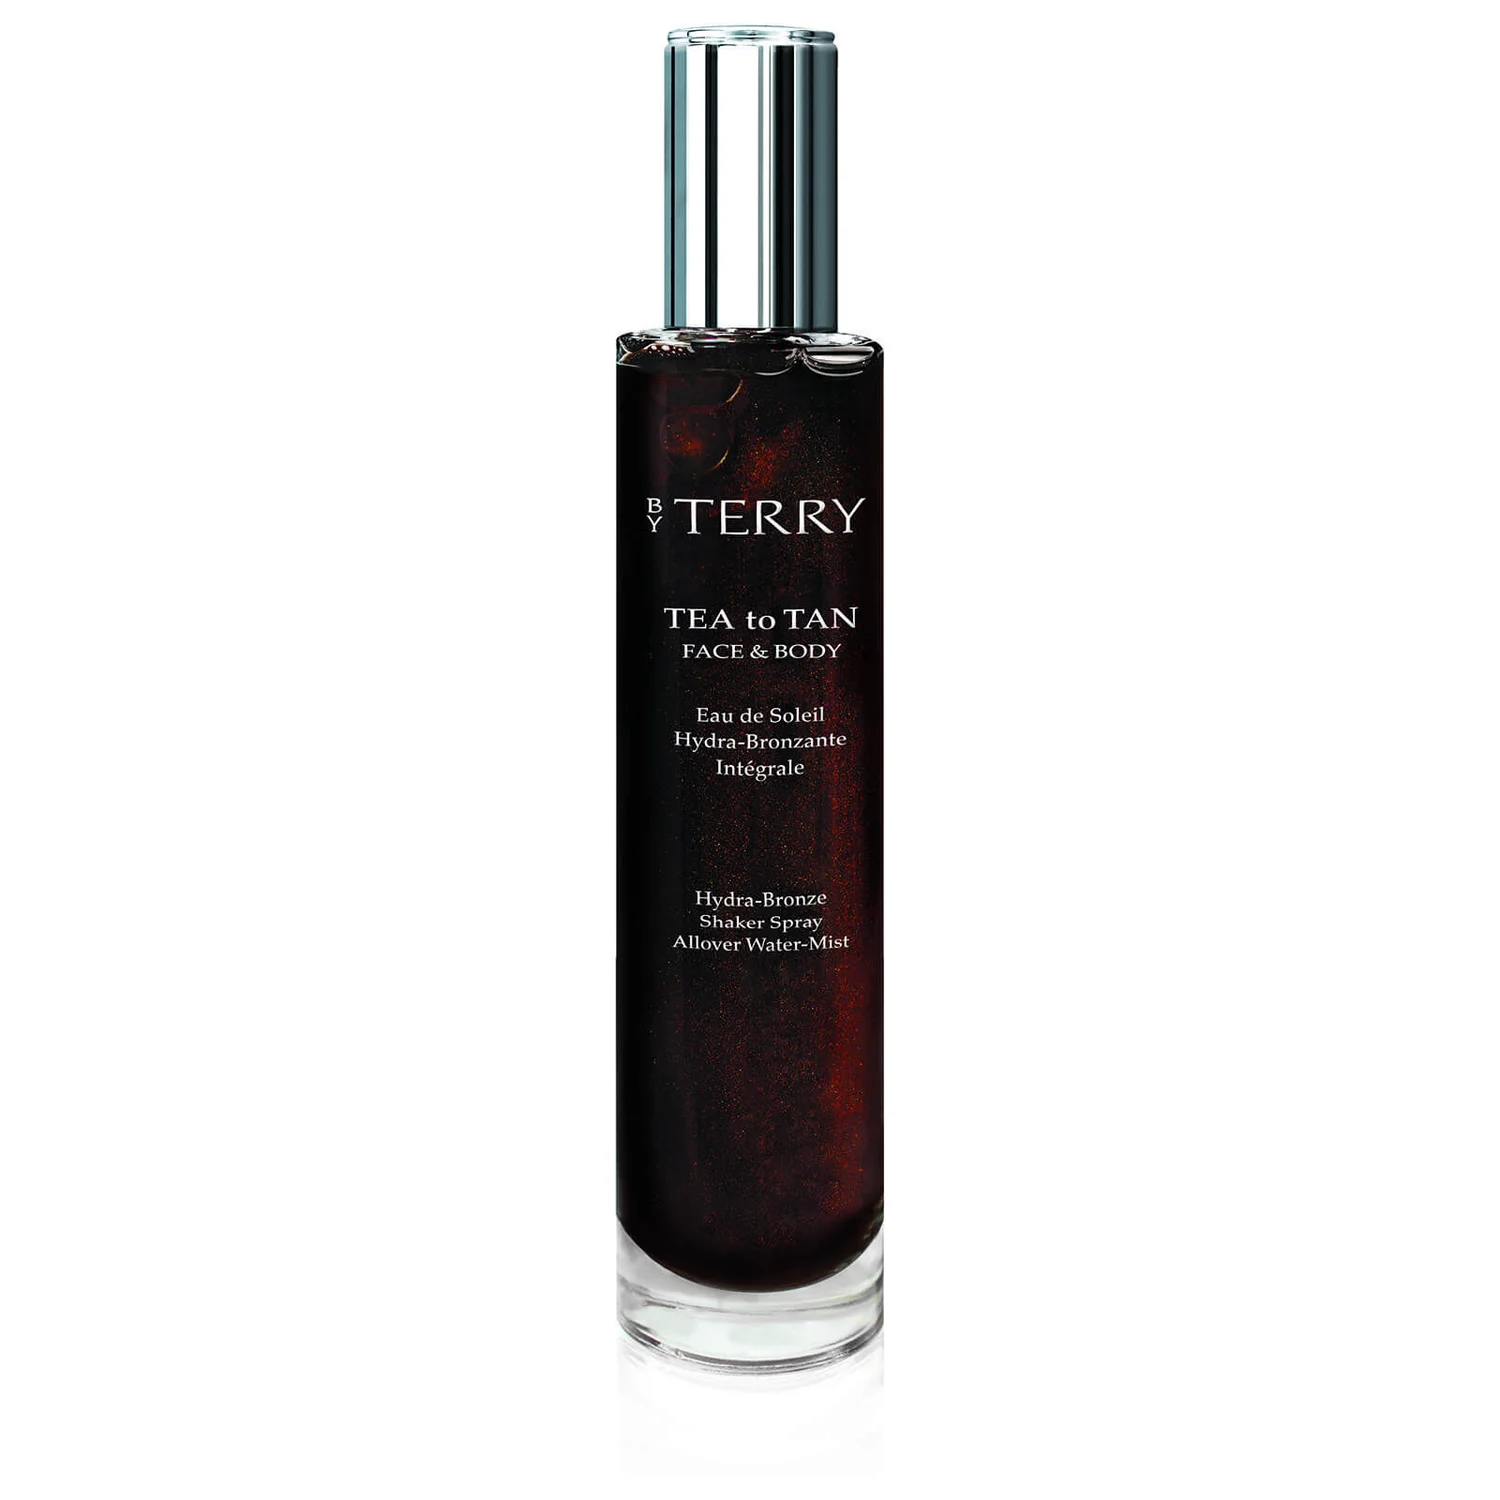 By Terry Tea to Tan Face and Body Bronzer - Summer Bronze 100ml  £55.00